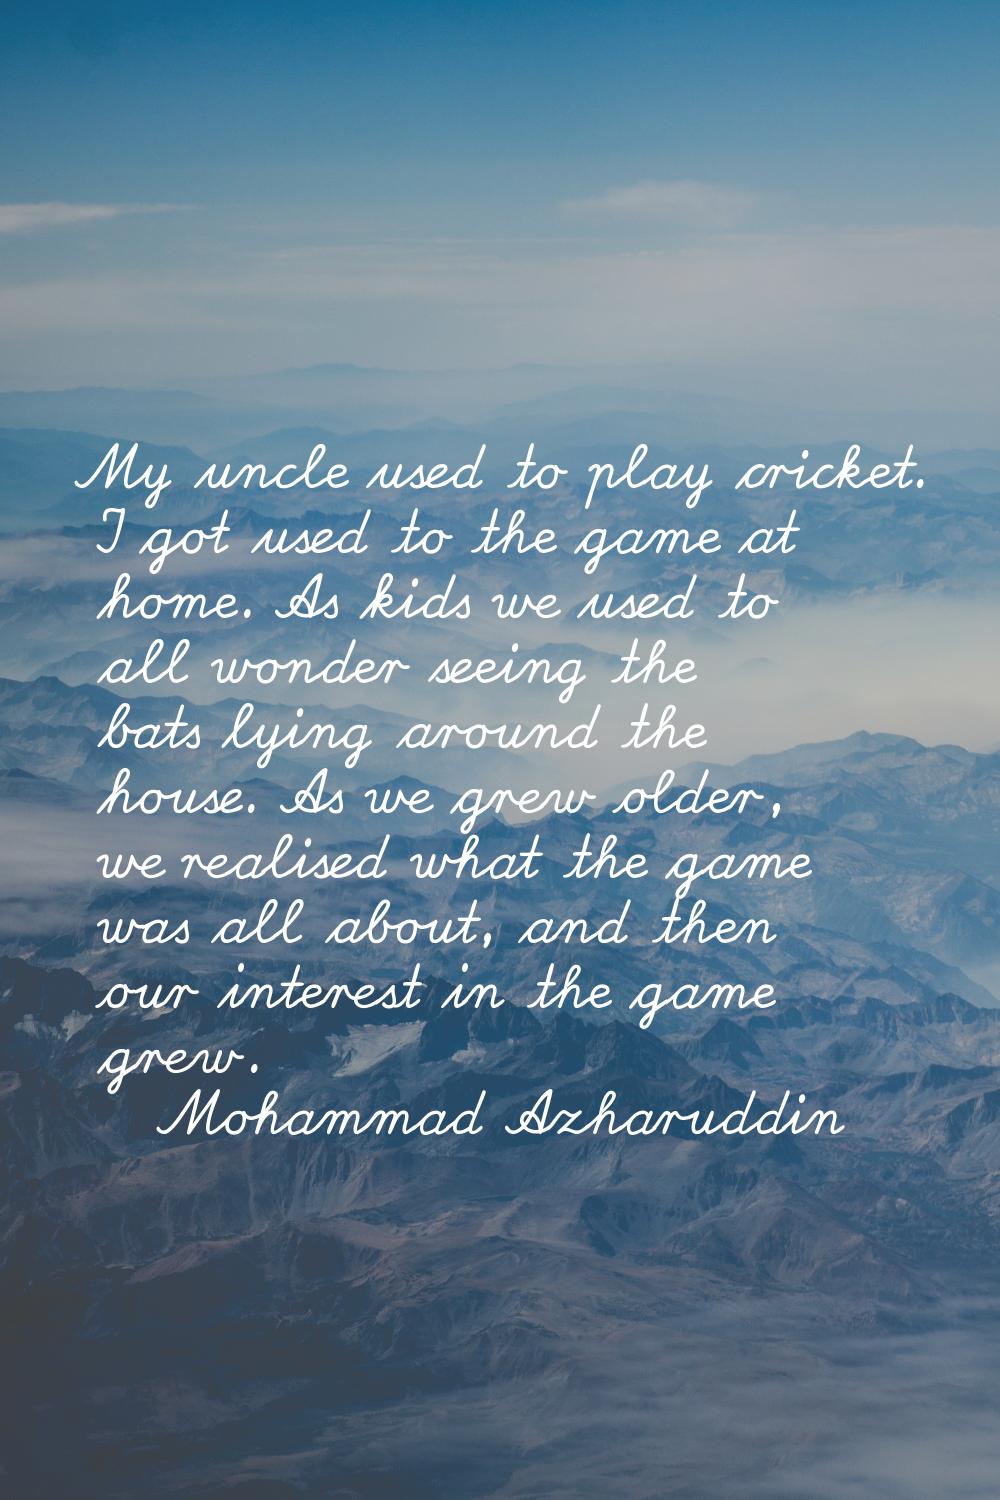 My uncle used to play cricket. I got used to the game at home. As kids we used to all wonder seeing